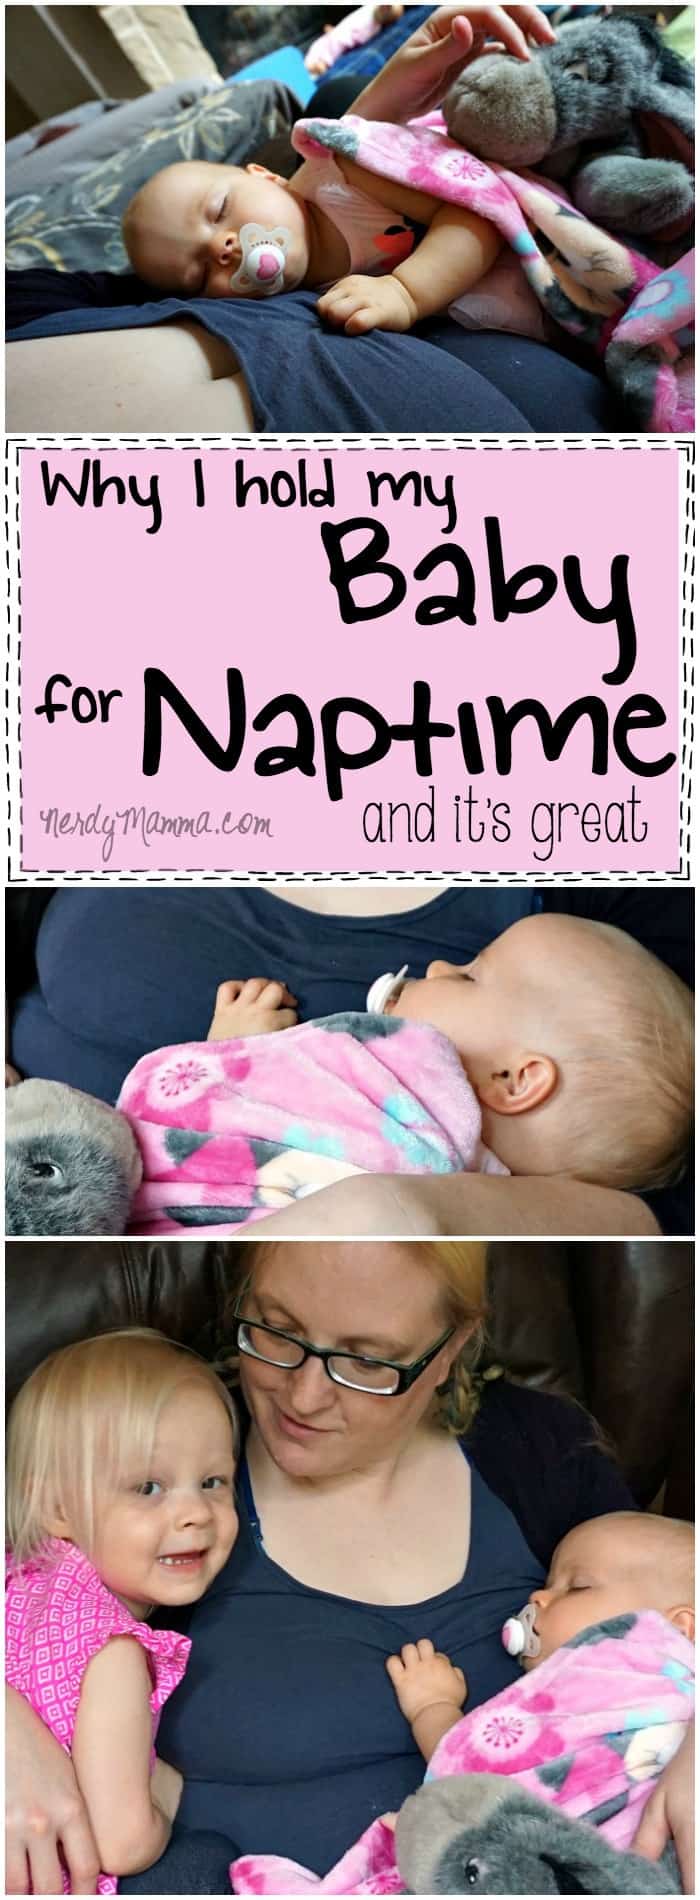 I love this mom's thoughts on why she holds her baby for naptime. It's so sweet that she's cuddling for all the right reasons.